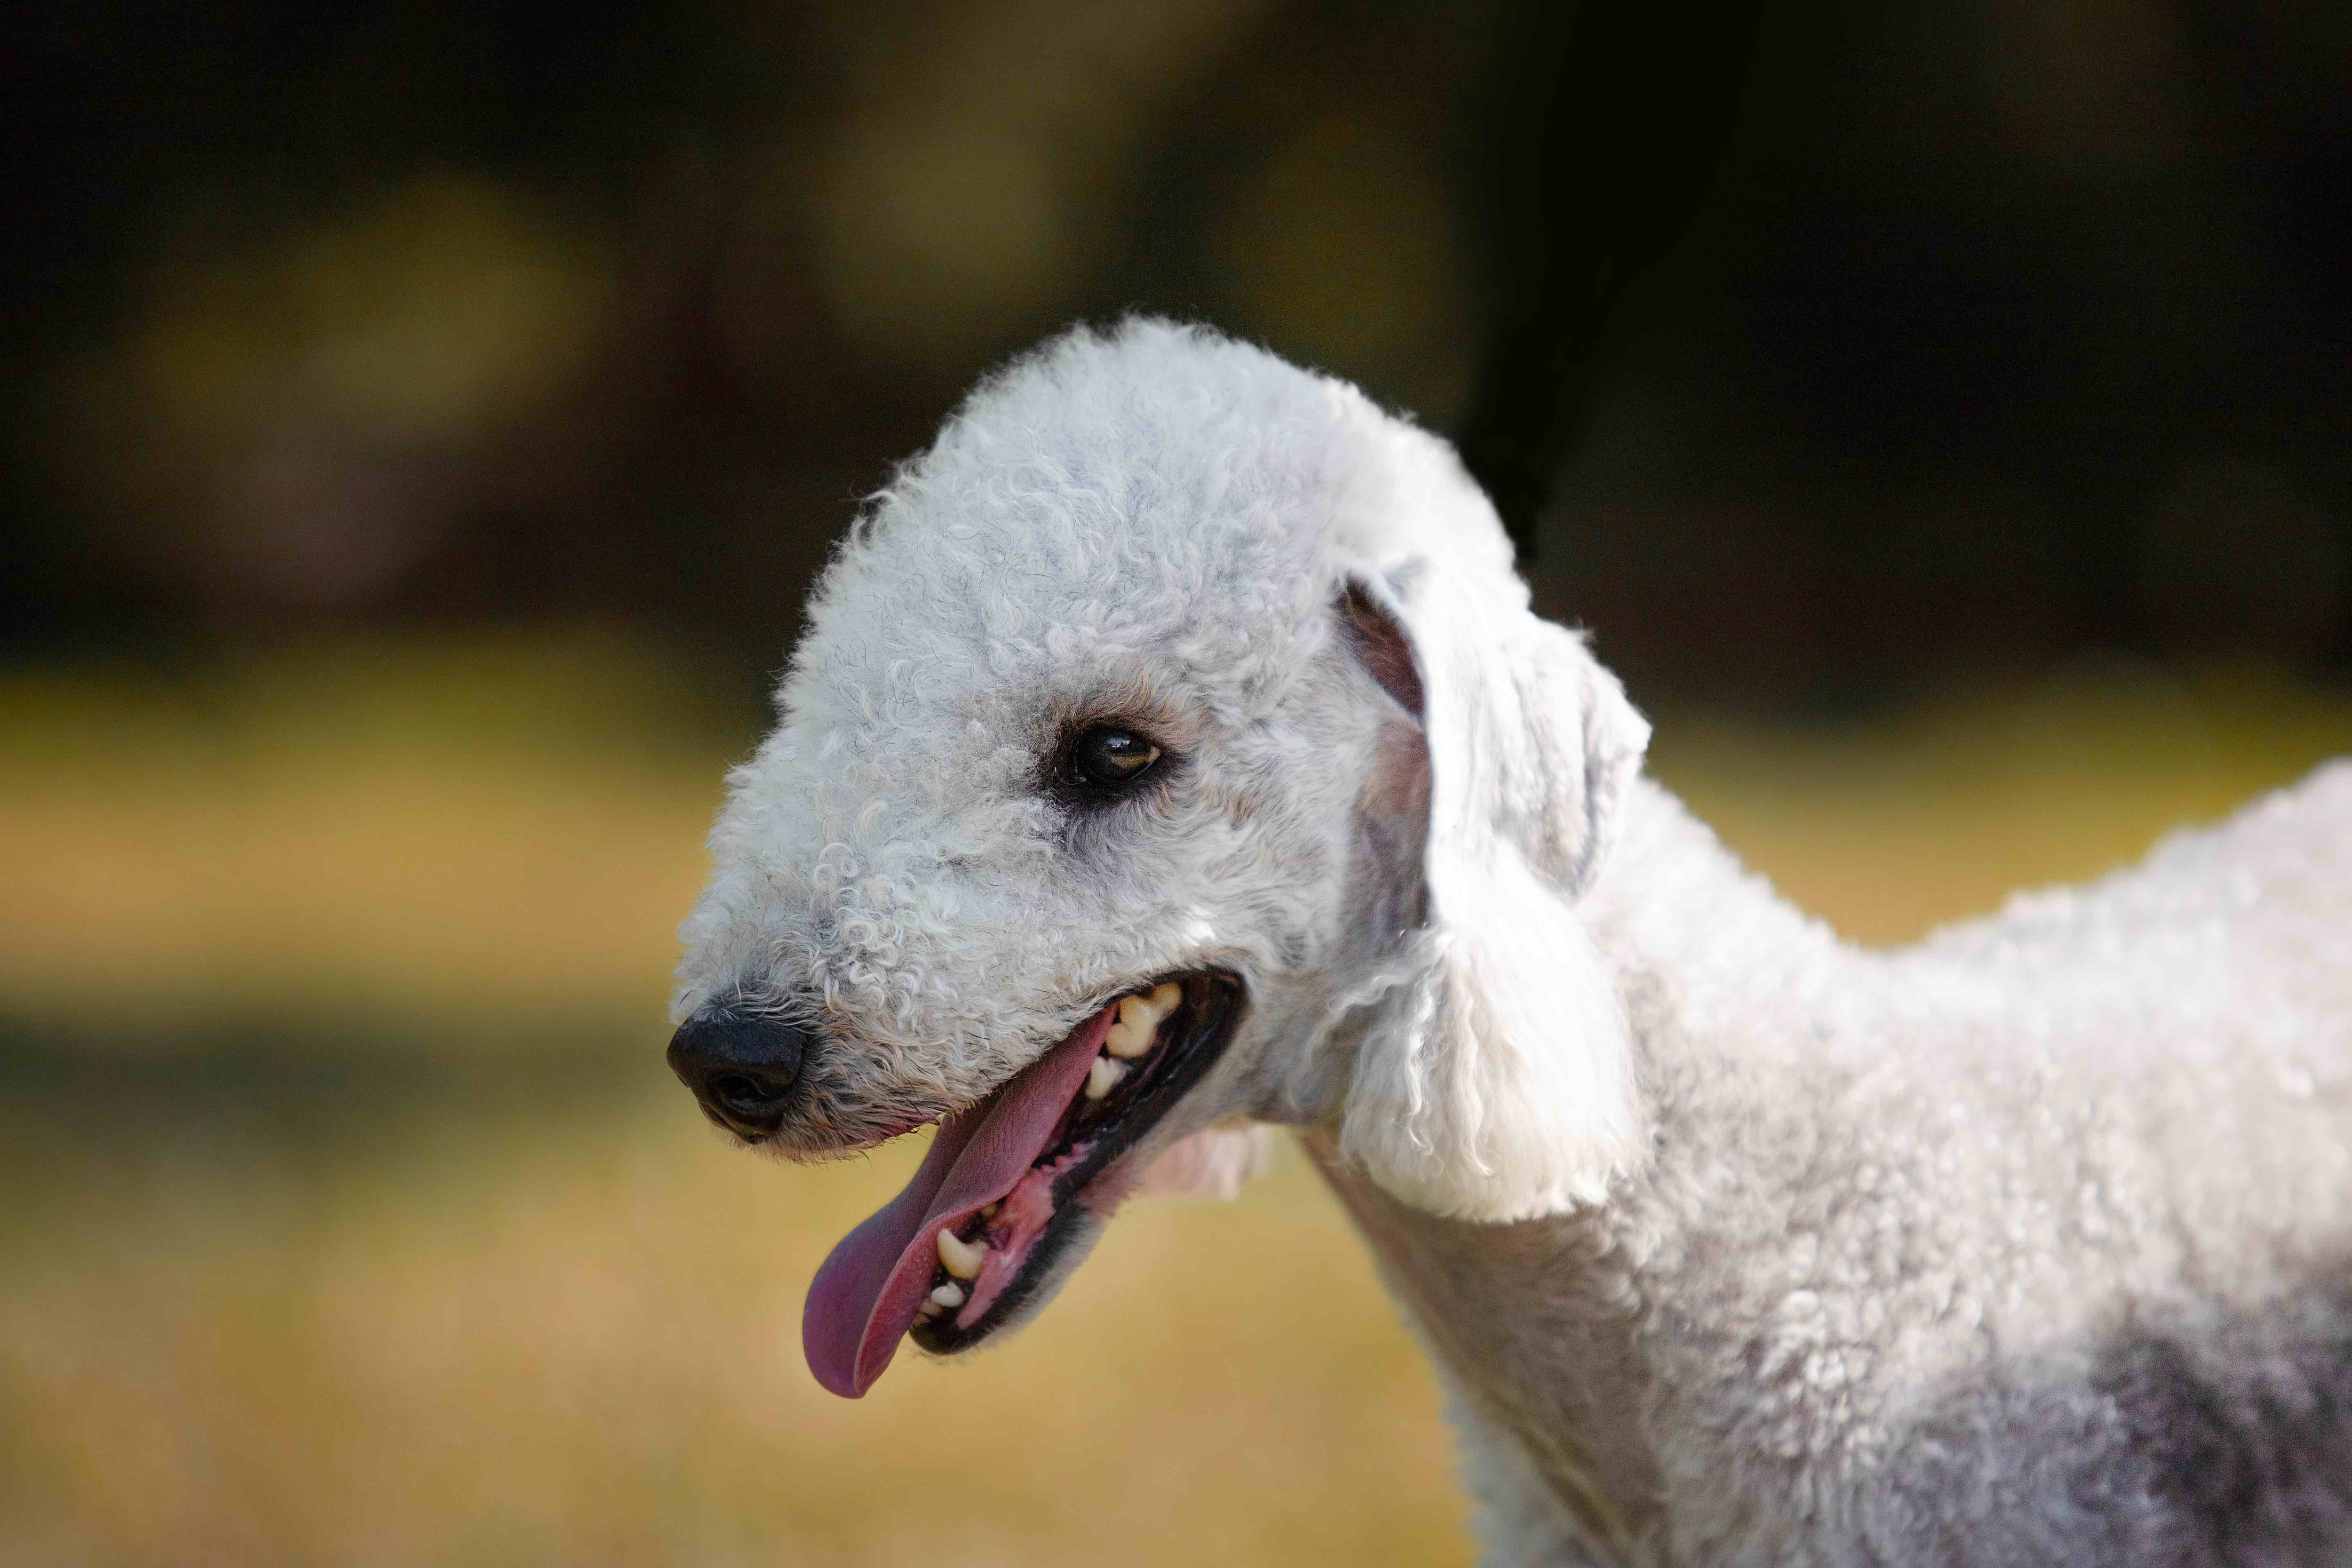 close-up of a groomed bedlington terrier with a top knot